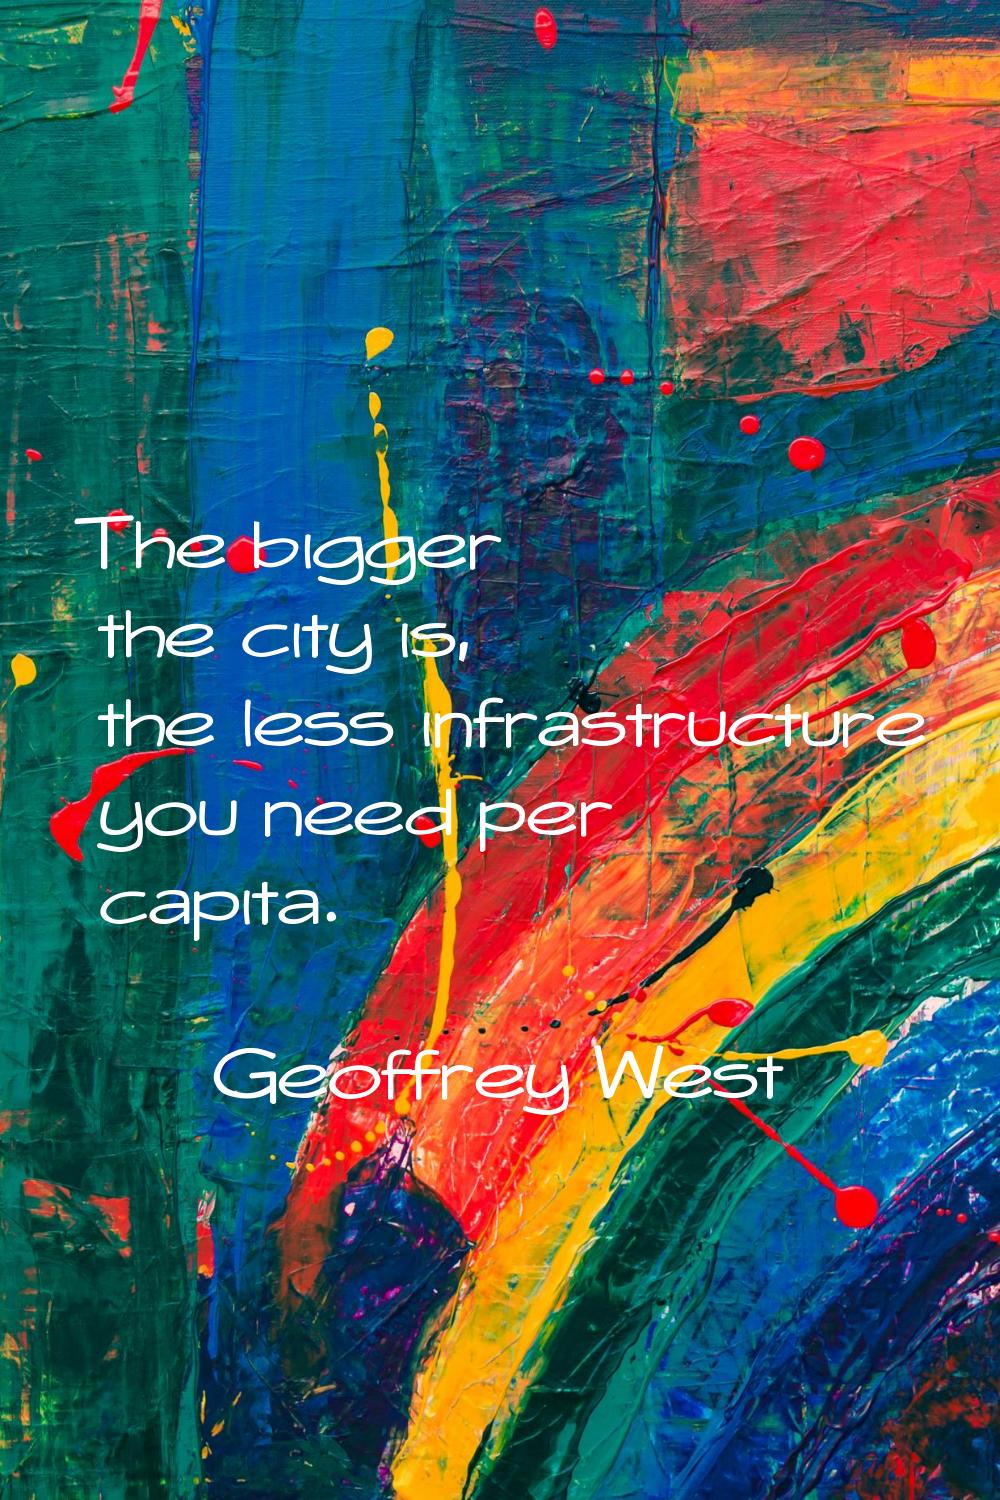 The bigger the city is, the less infrastructure you need per capita.